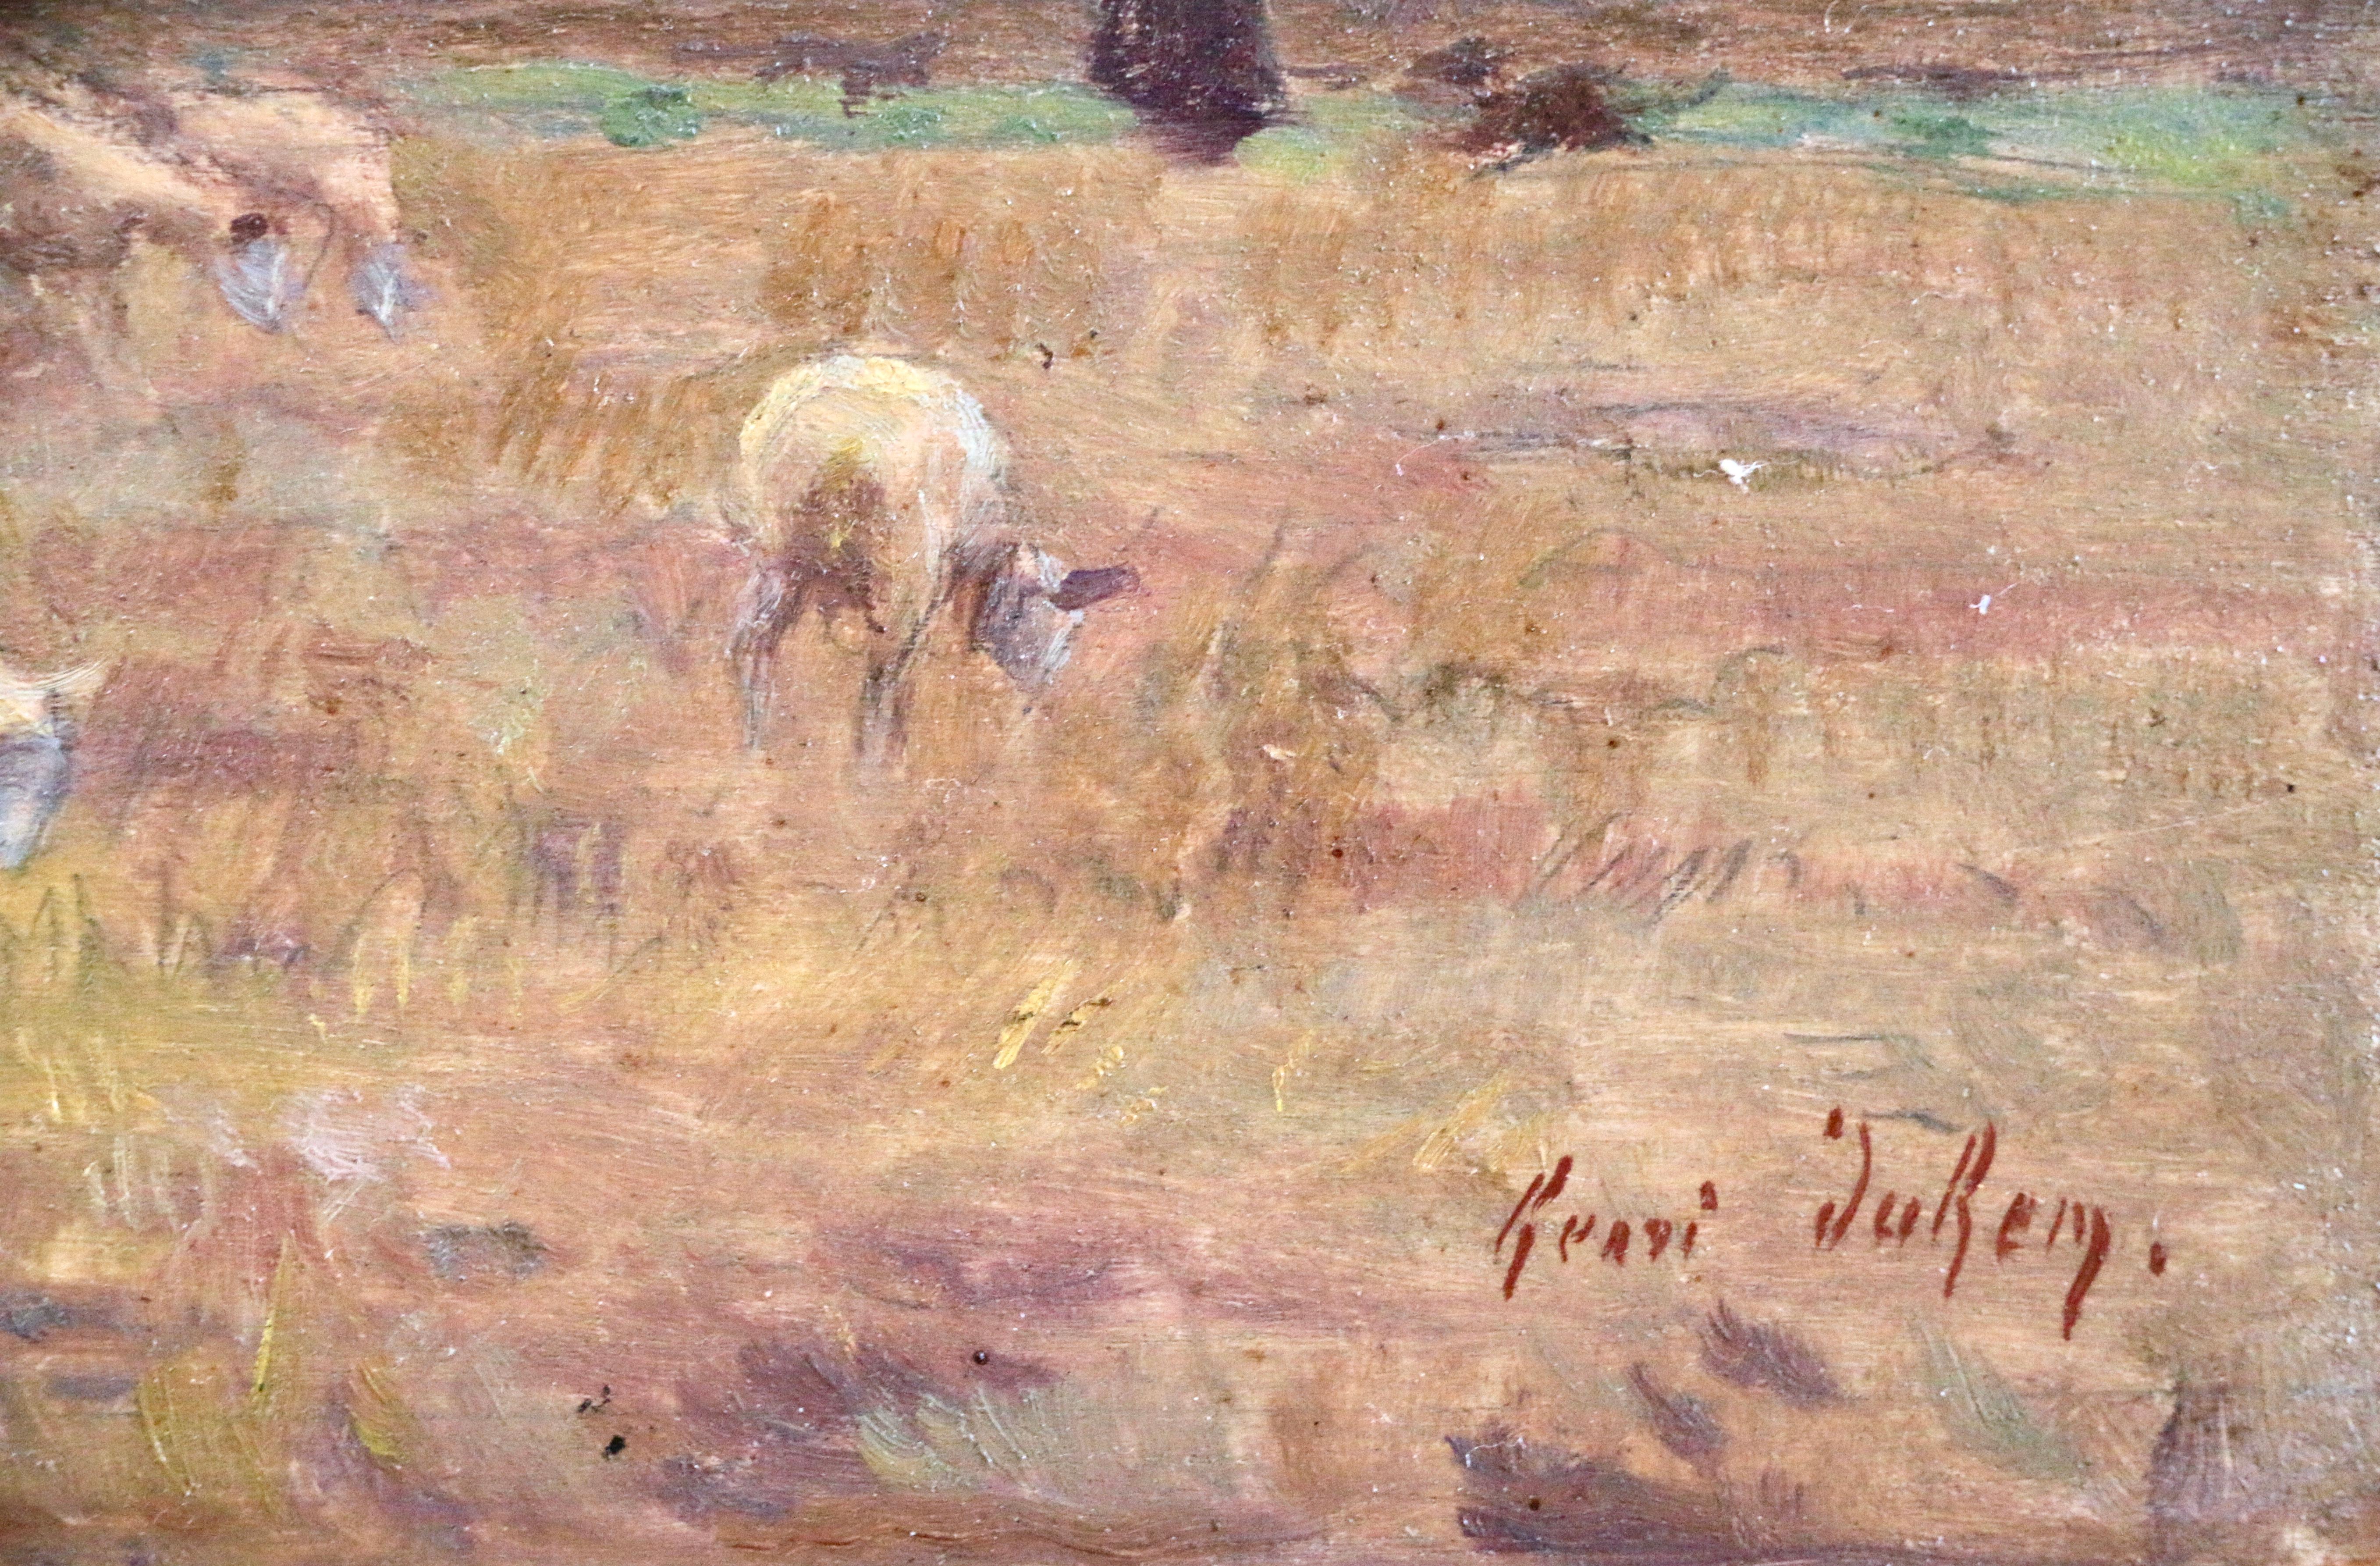 Shepherd and his Flock - 19th Century Oil, Sheep & Figure in Landscape by Duhem – Painting von Henri Duhem